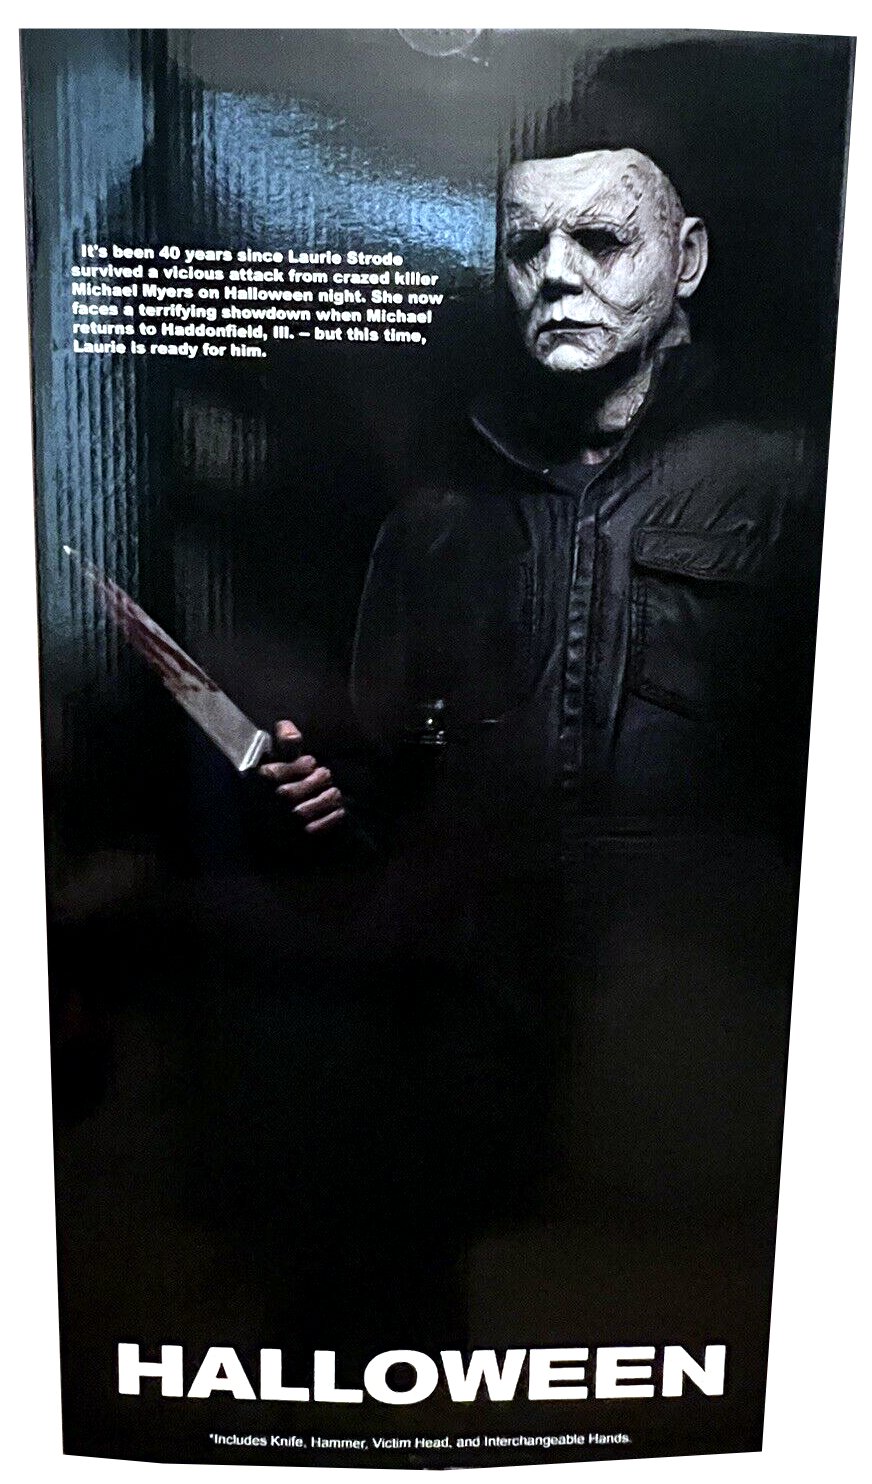 Michael Myers returns to NECA’s 1/4 scale action figure